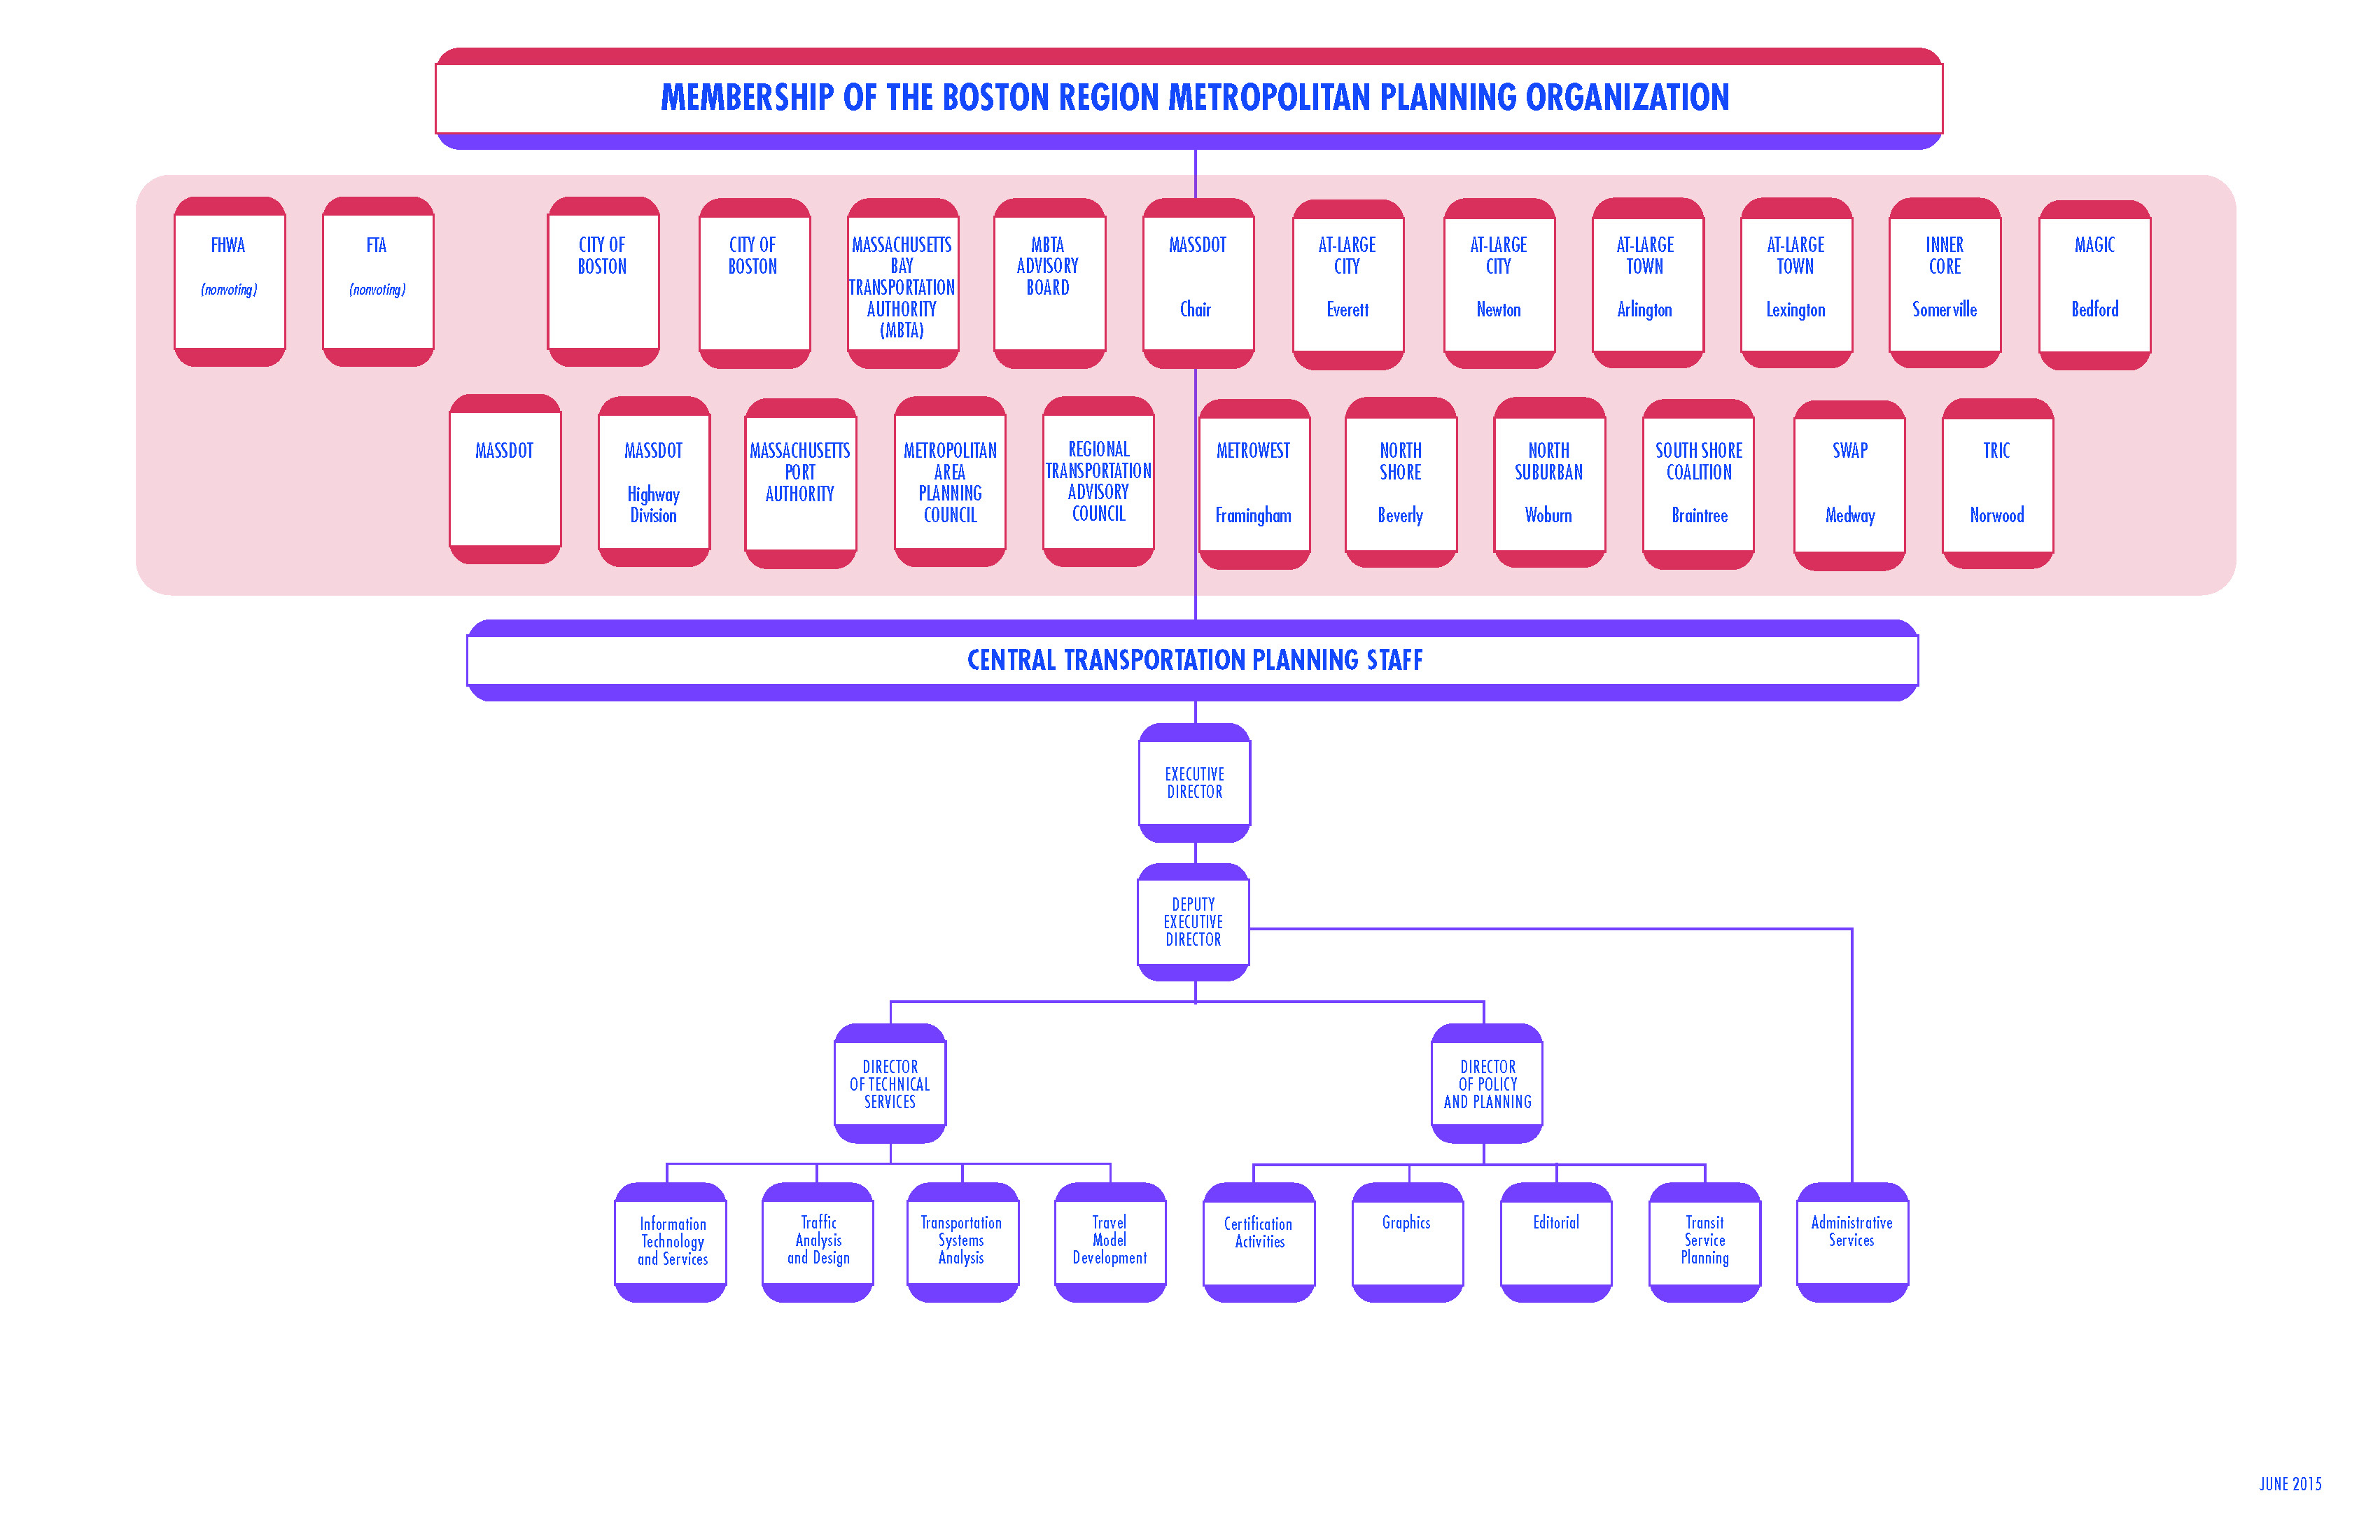 This figure shows the membership of the Boston Region Metropolitan Planning Organization, as described in the chapter, along with the organizational chart of the Central Transportation Planning Staff (CTPS) below.